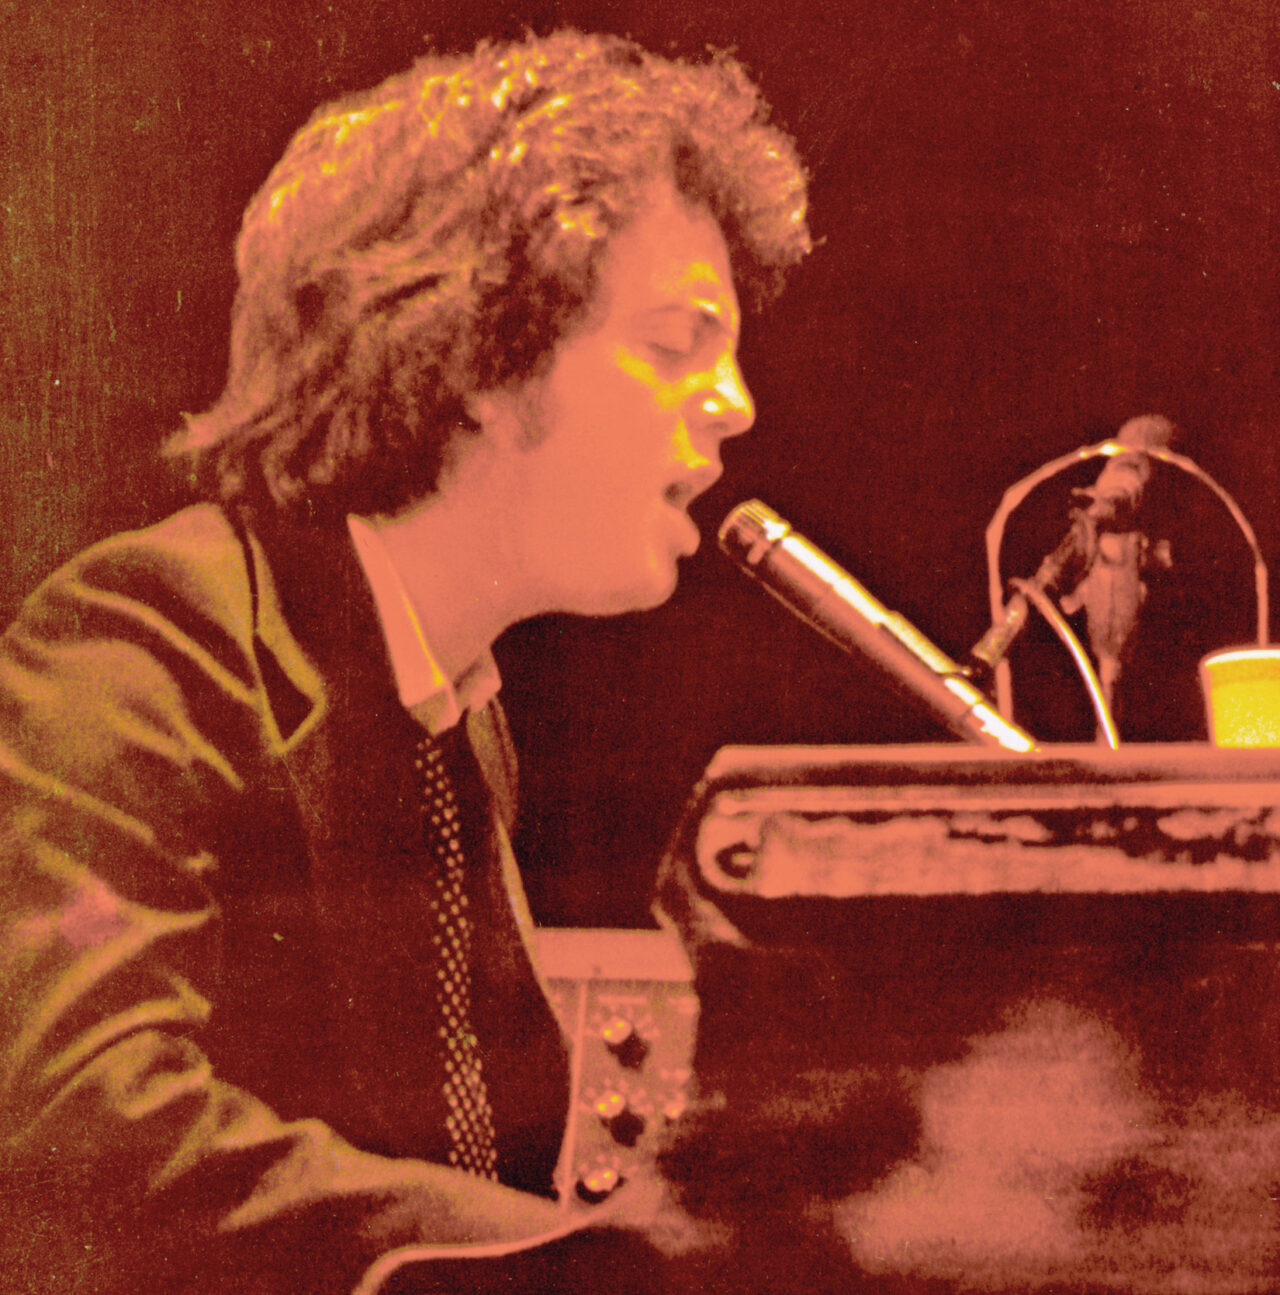 A man sits playing a piano and singing into a microphone.